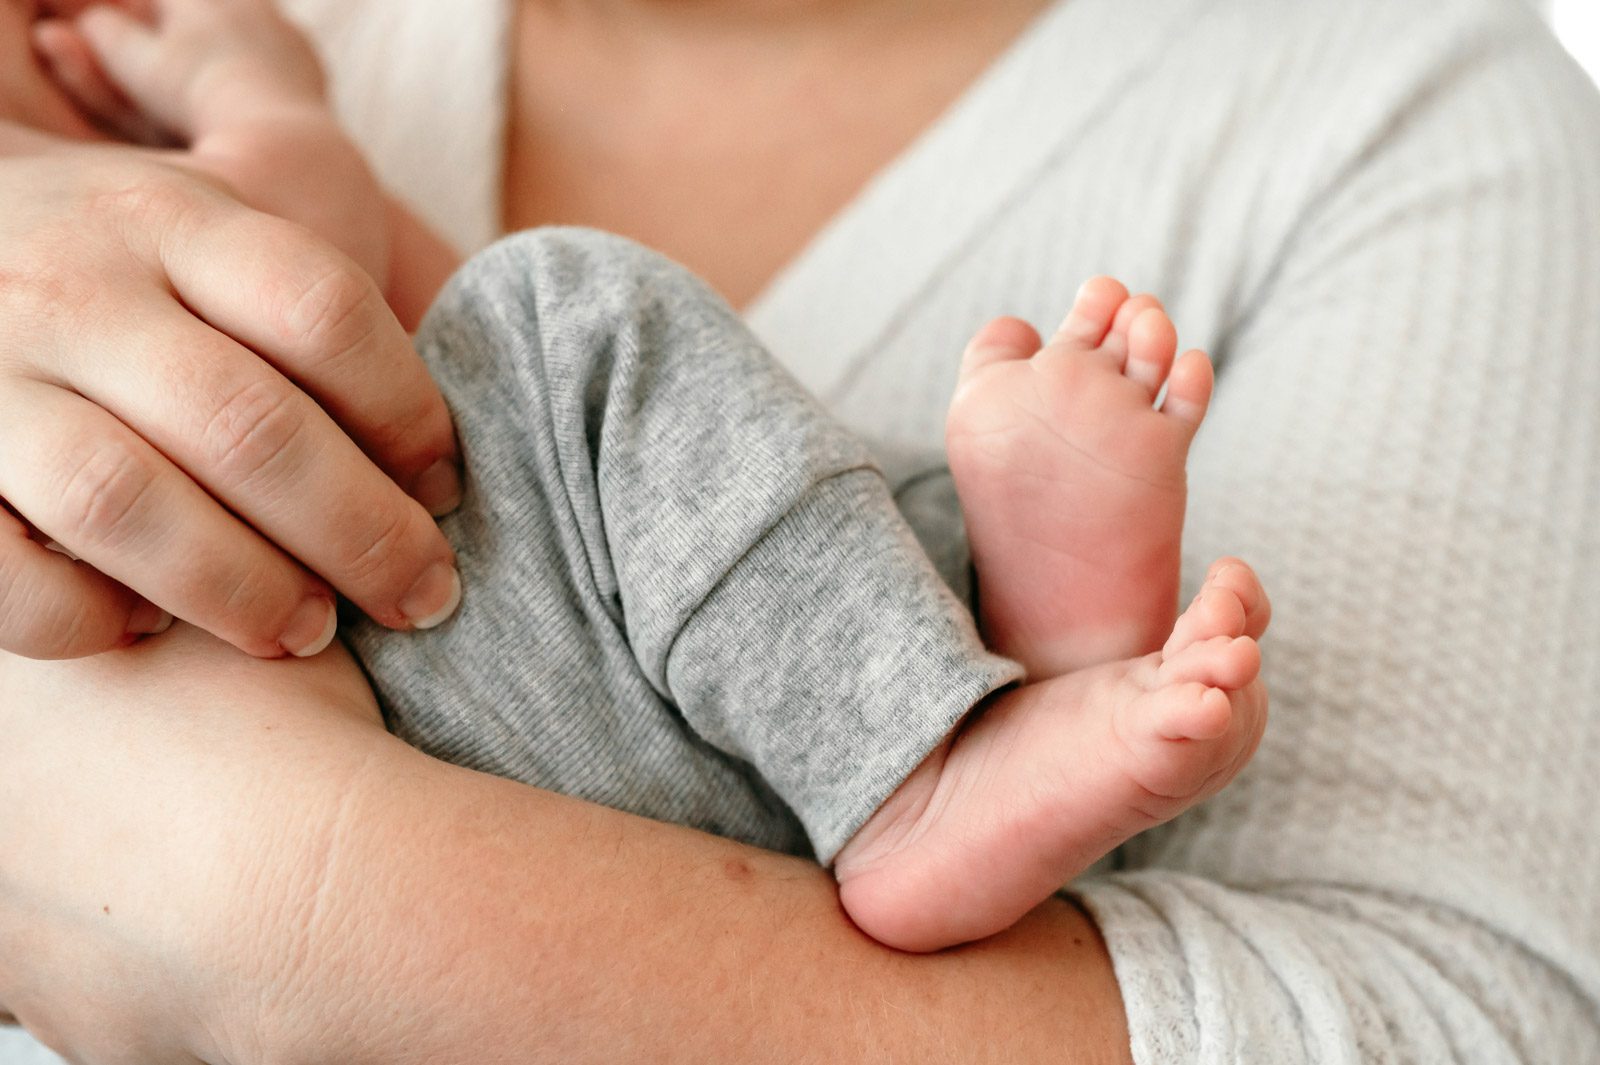 a close up picture of a newborn baby boy's feet while his mother cradles him in her arms during an in home newborn photoshoot